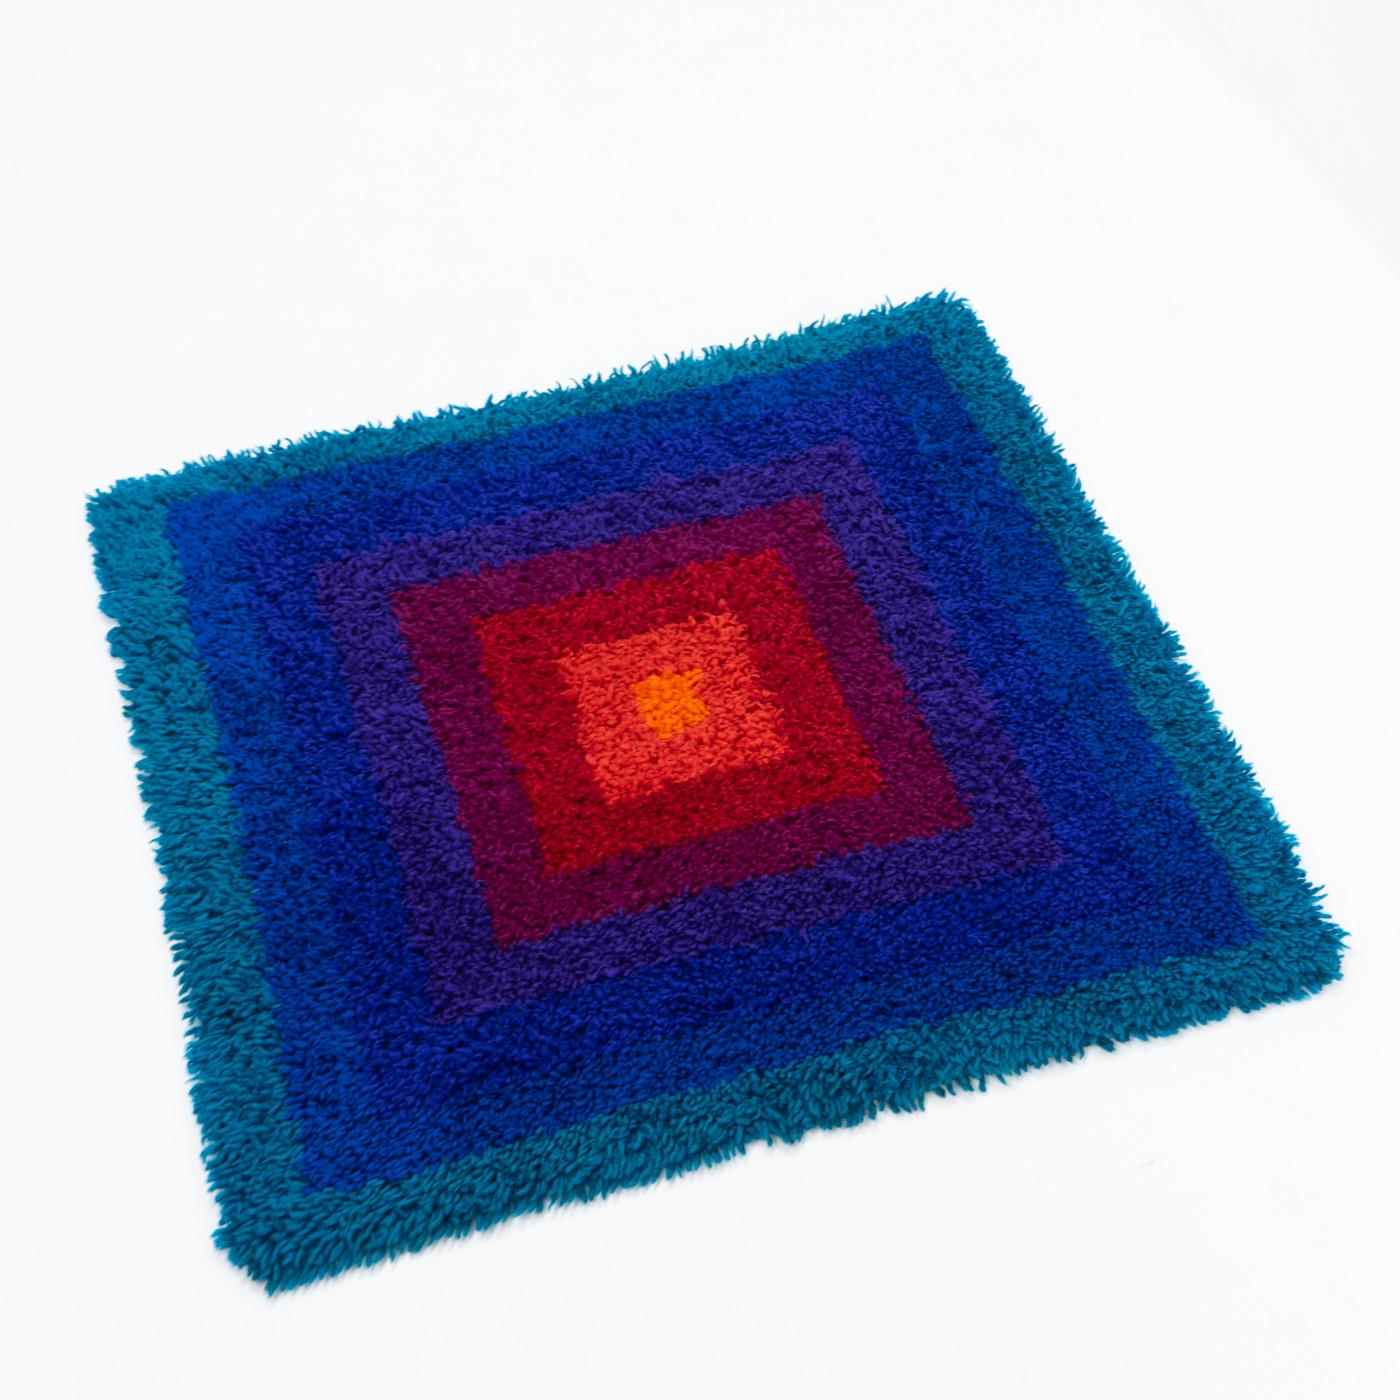 Square rug designed by Verner Panton in the early 1970s and produced by Tisca (Mira-X), Switzerland during this same period. 

This exceptionally rare rug is still in very good condition, with no repairs or damages. The colours of the square